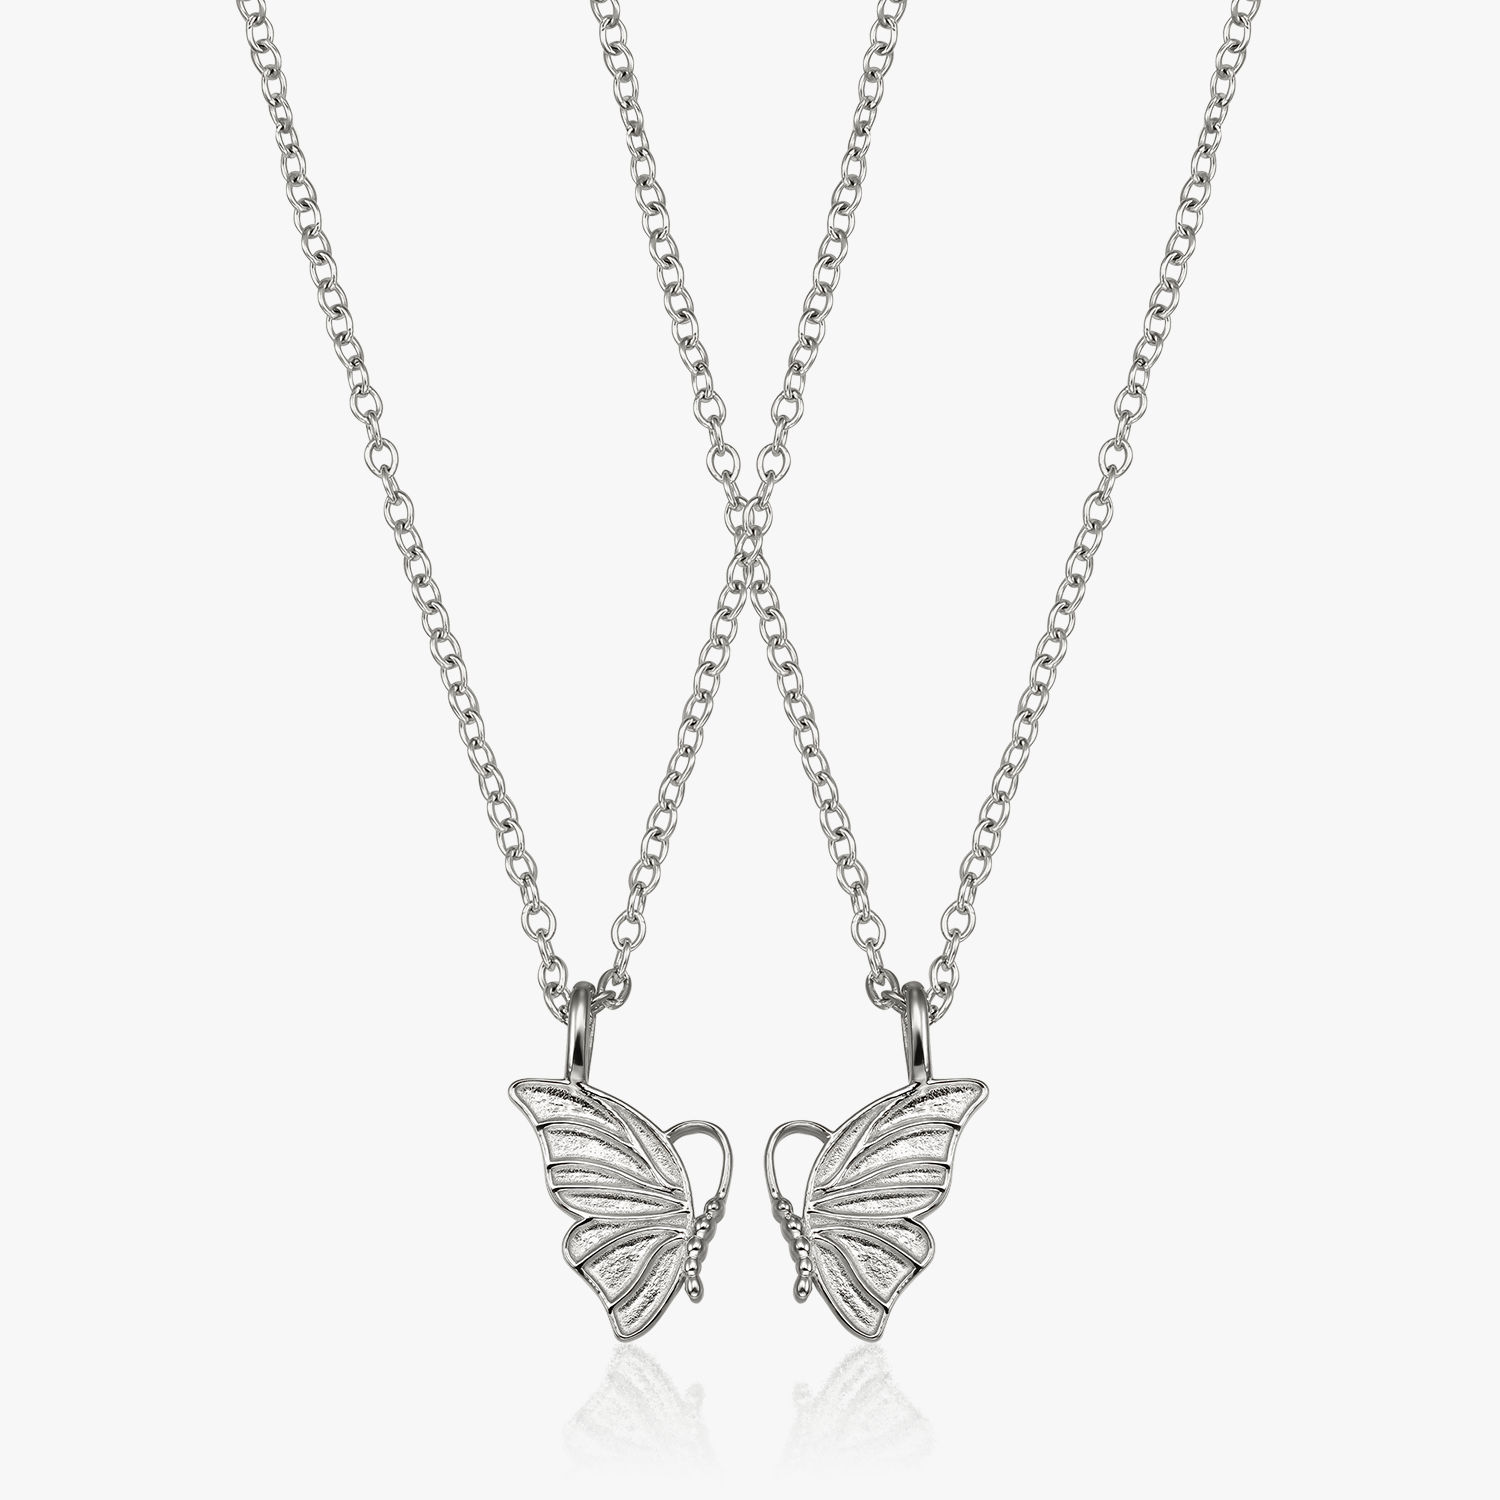 Bestfriends Silver Necklaces - You Gave Me Wings